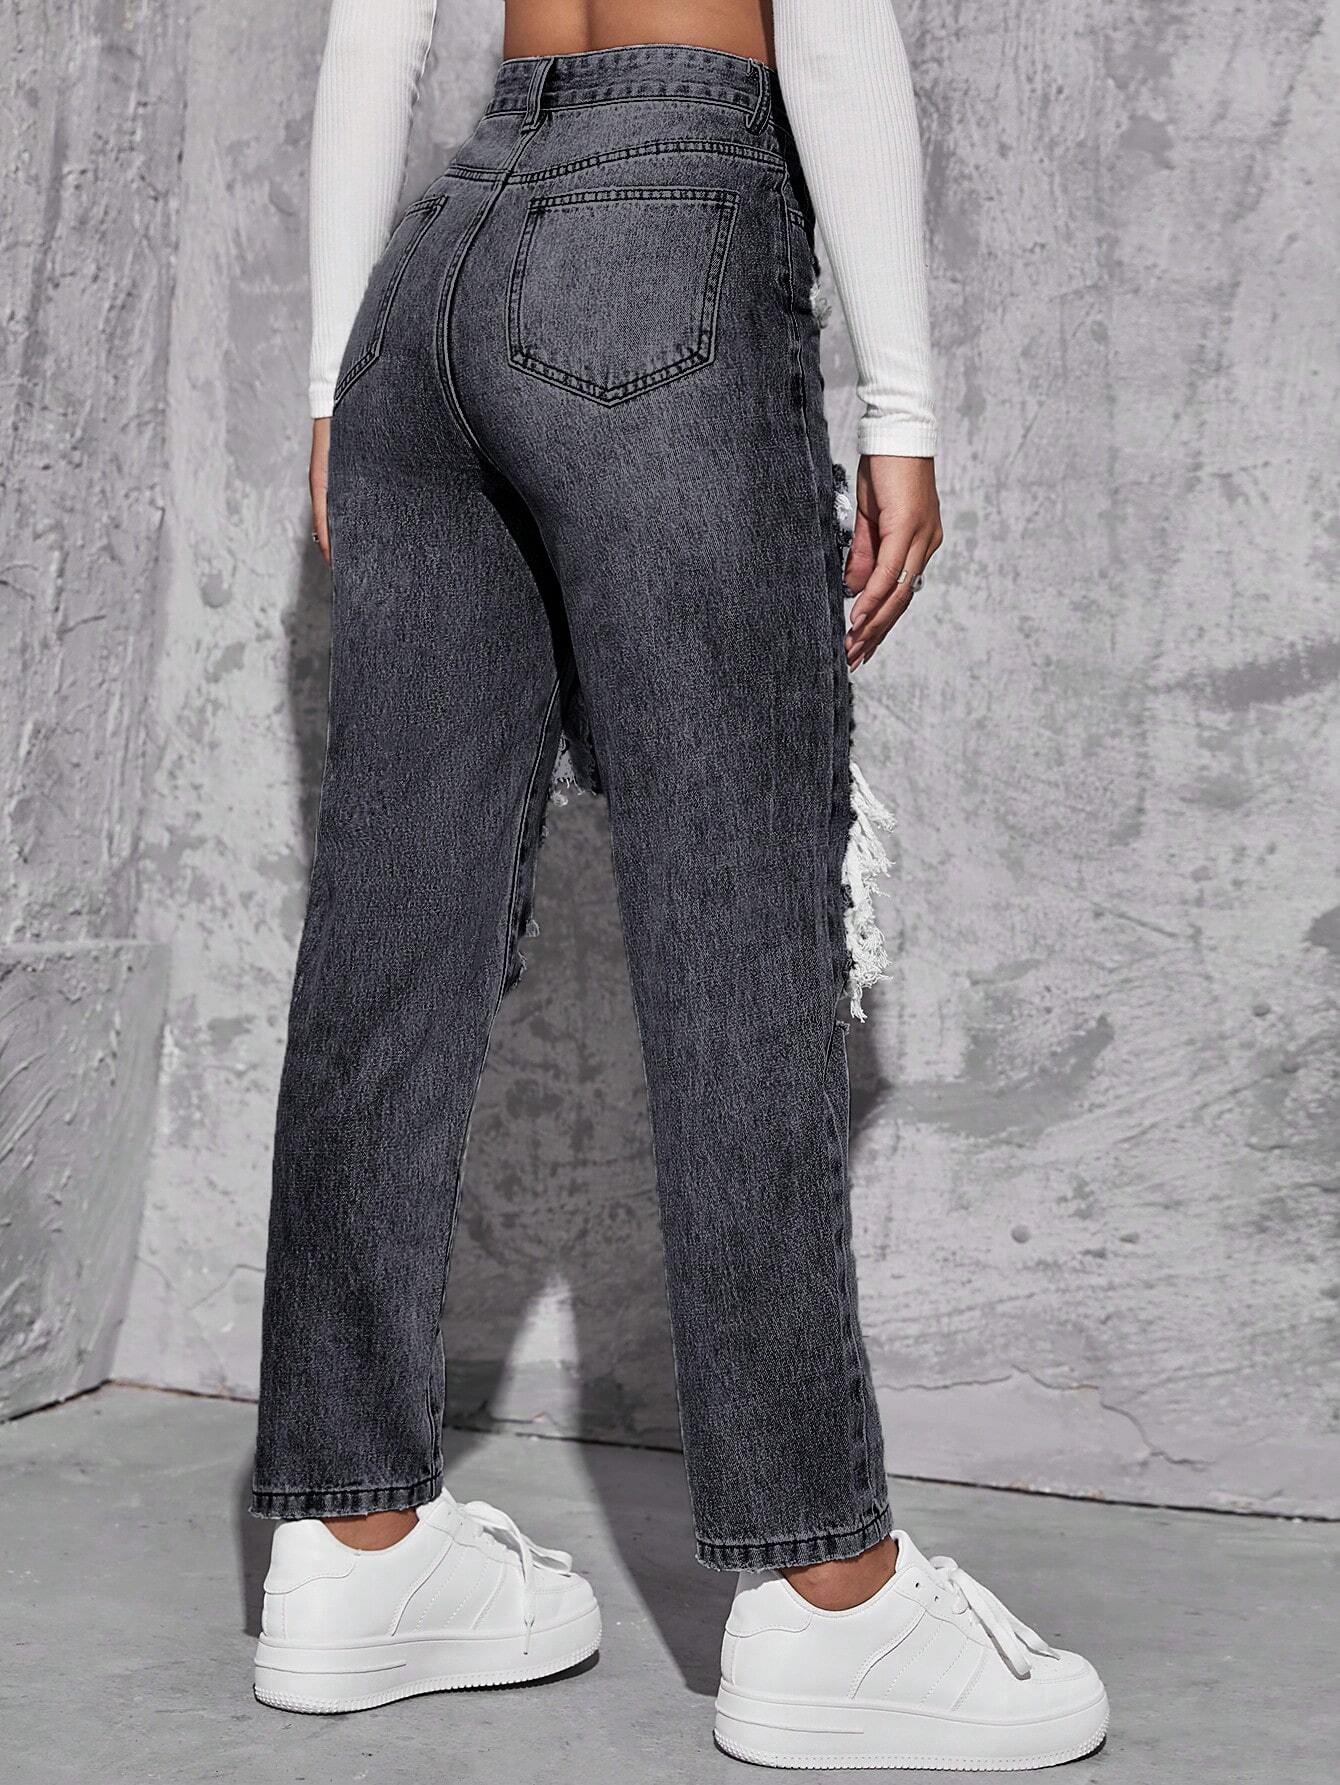 EZwear High Waist Ripped Mom Fit Jeans